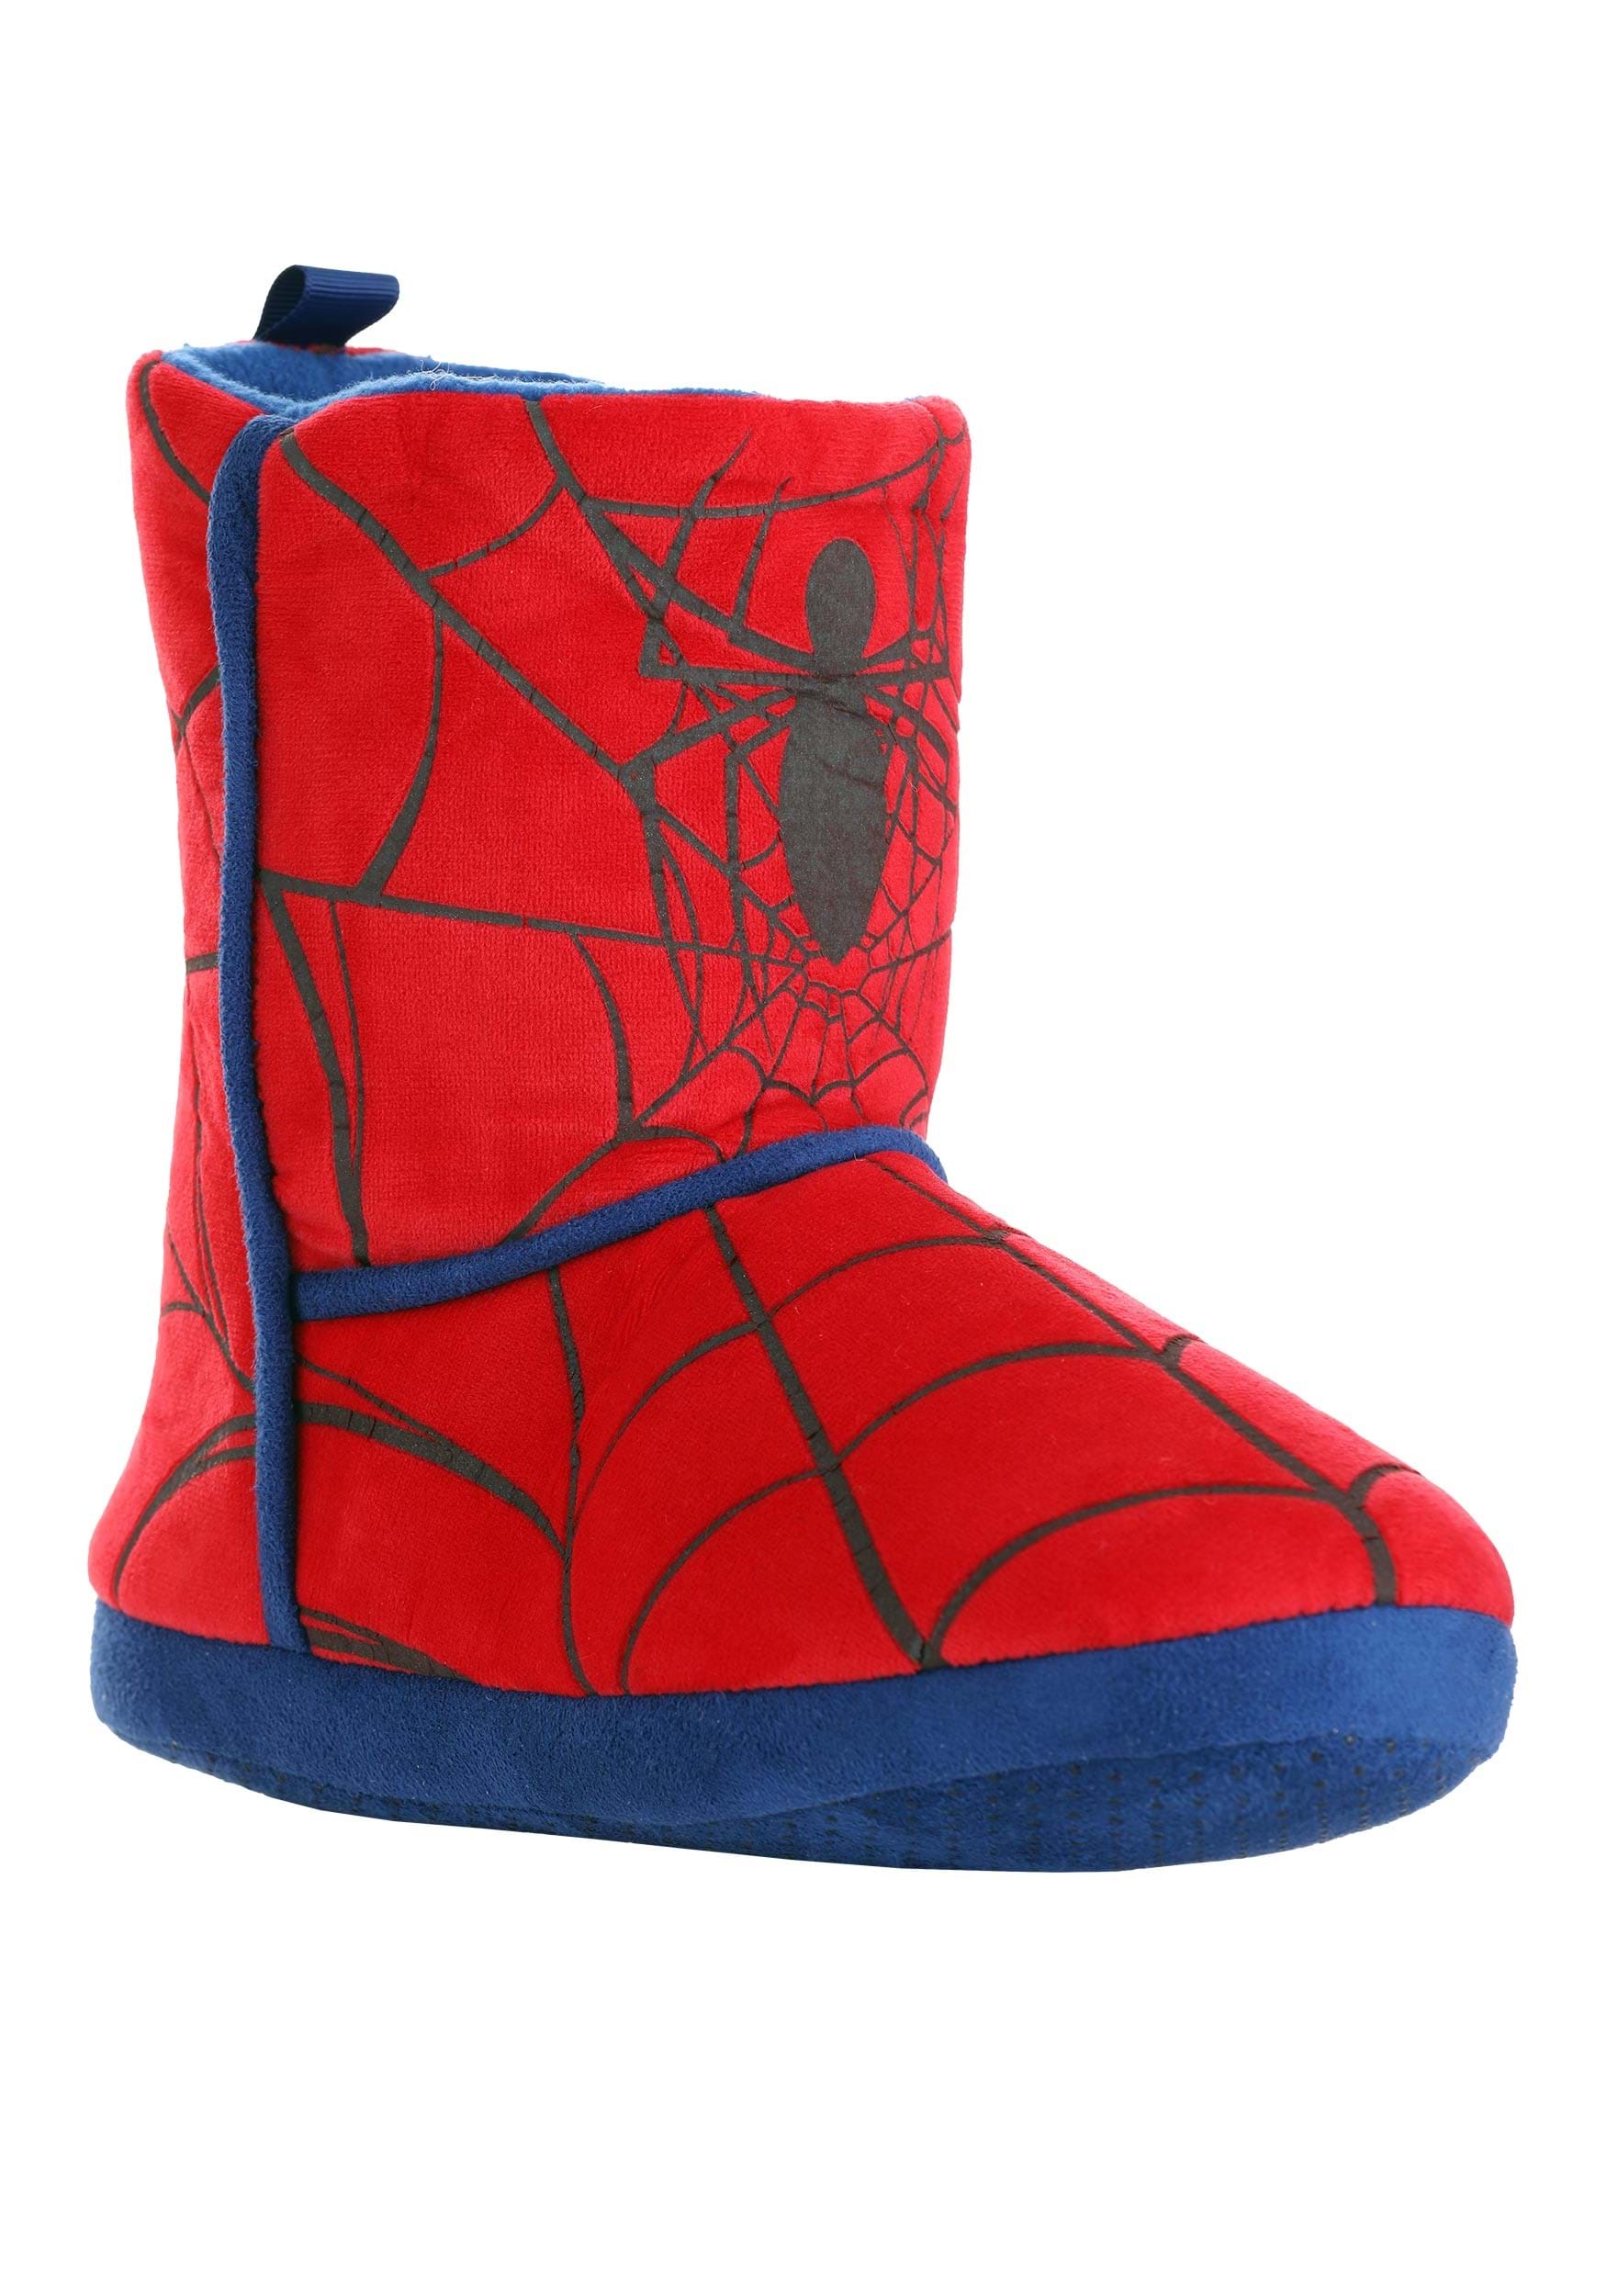 Spider-Man Boot Slippers Adults